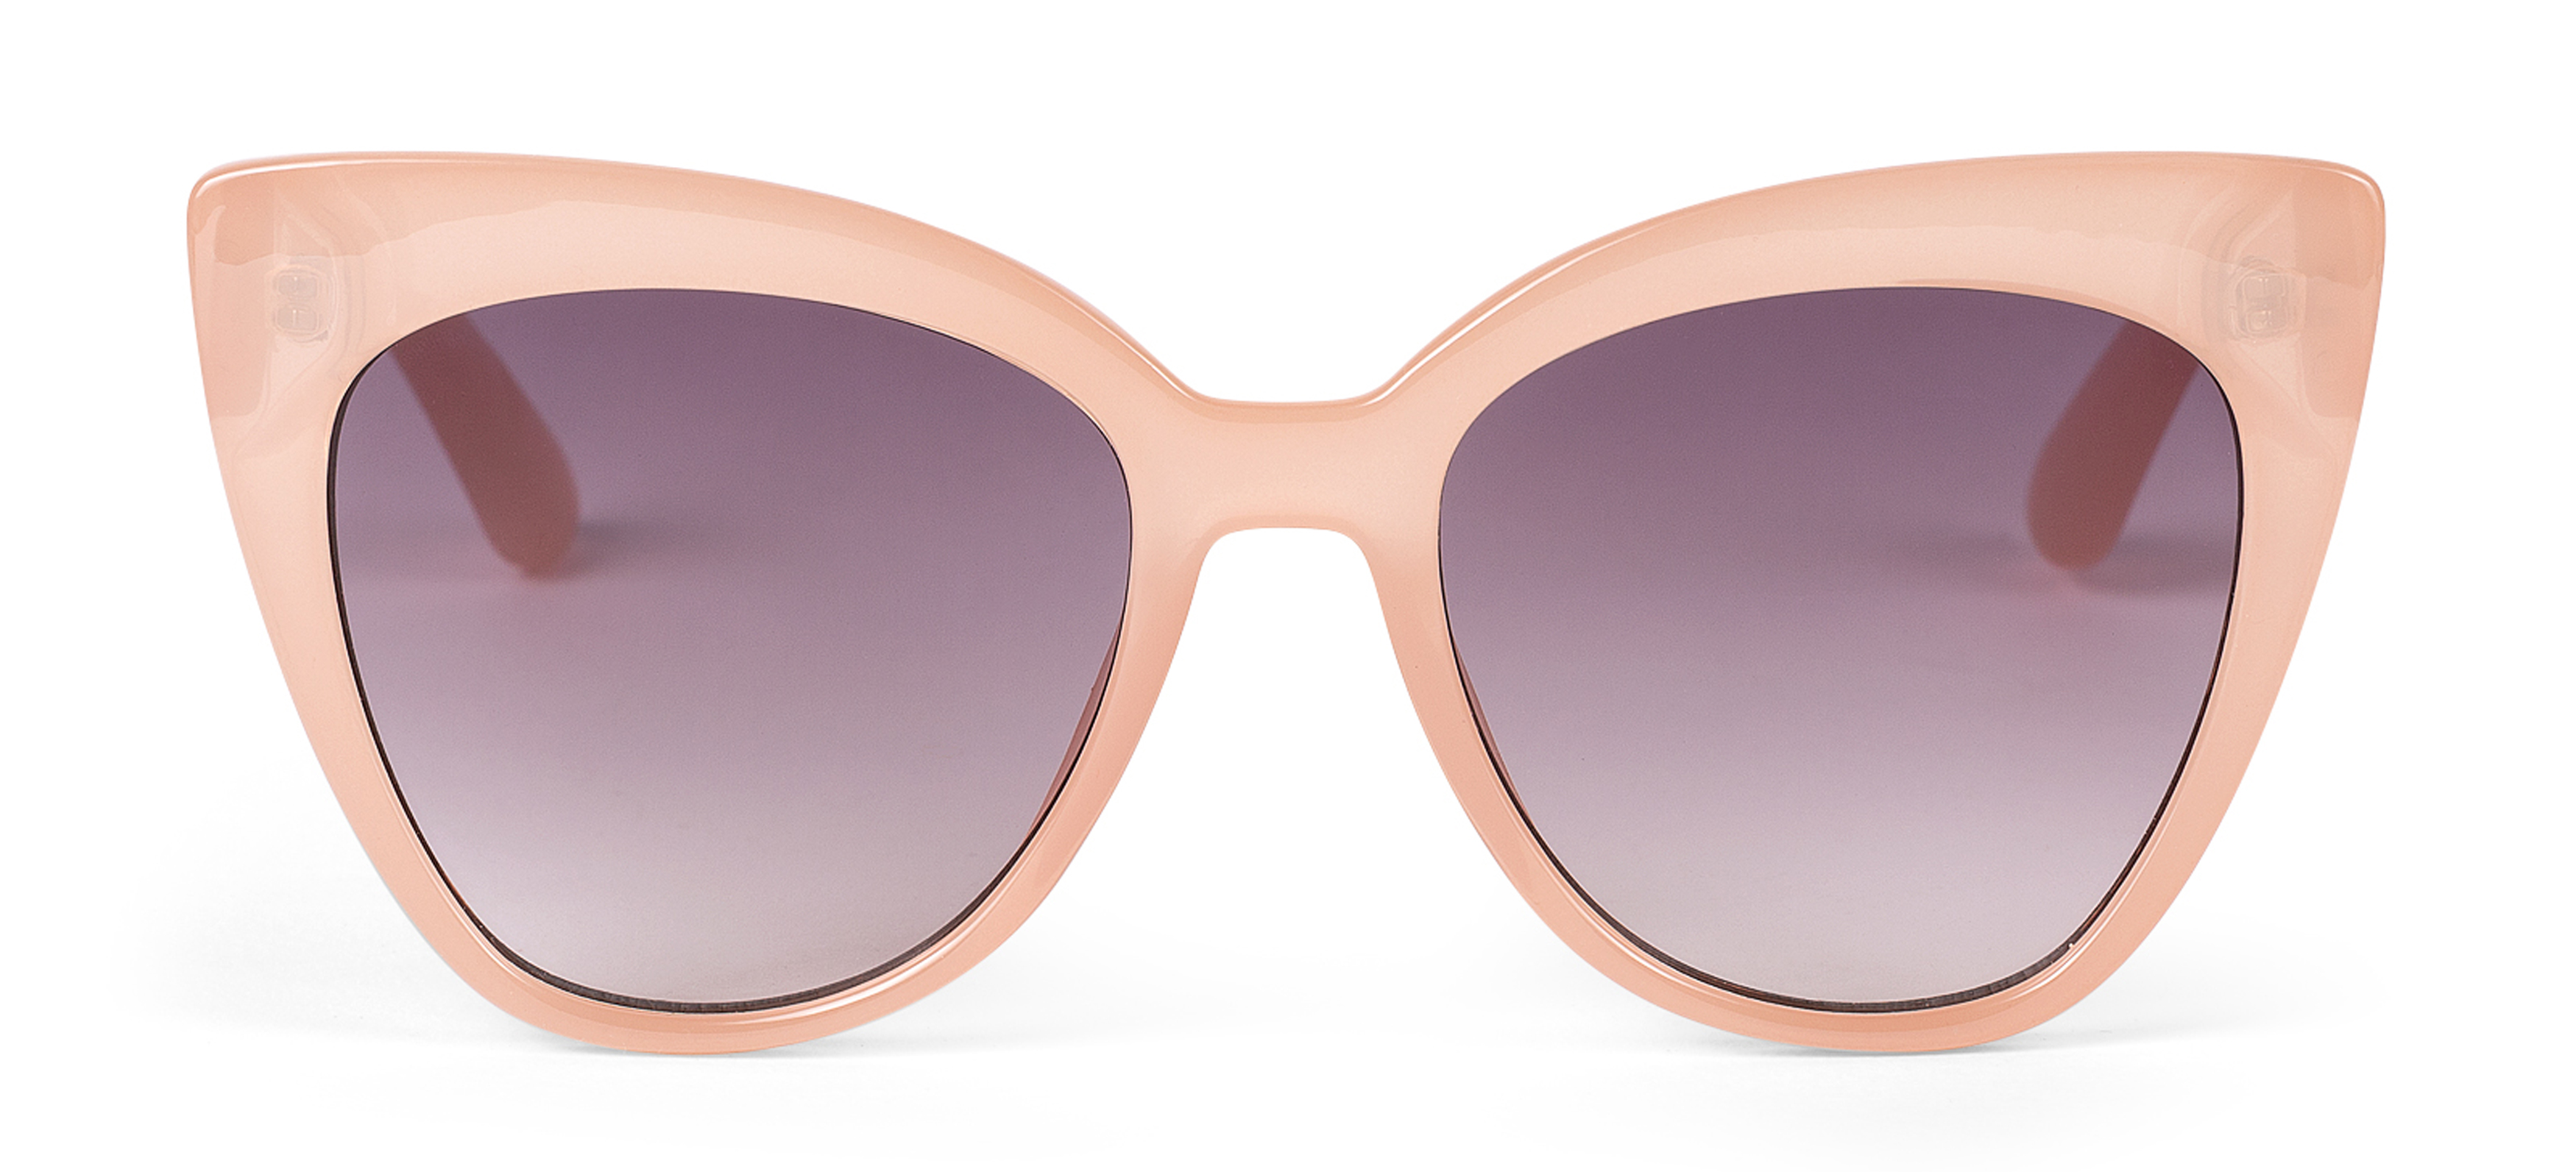 5 Of The Best Cat Eye Sunglasses For Every Face Shape